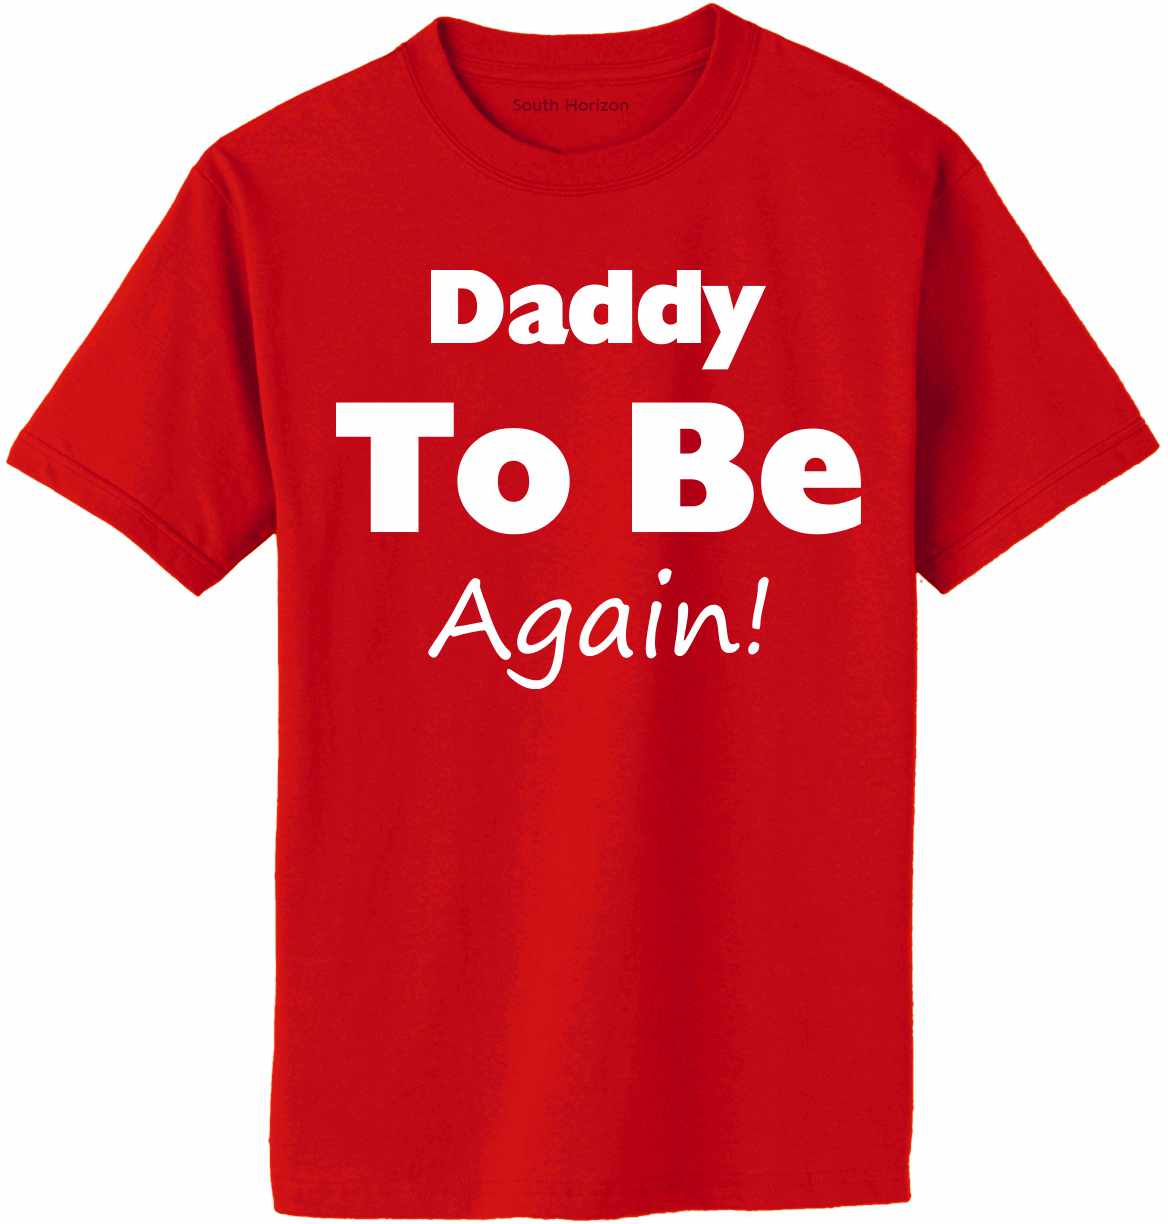 Daddy To Be Again Adult T-Shirt